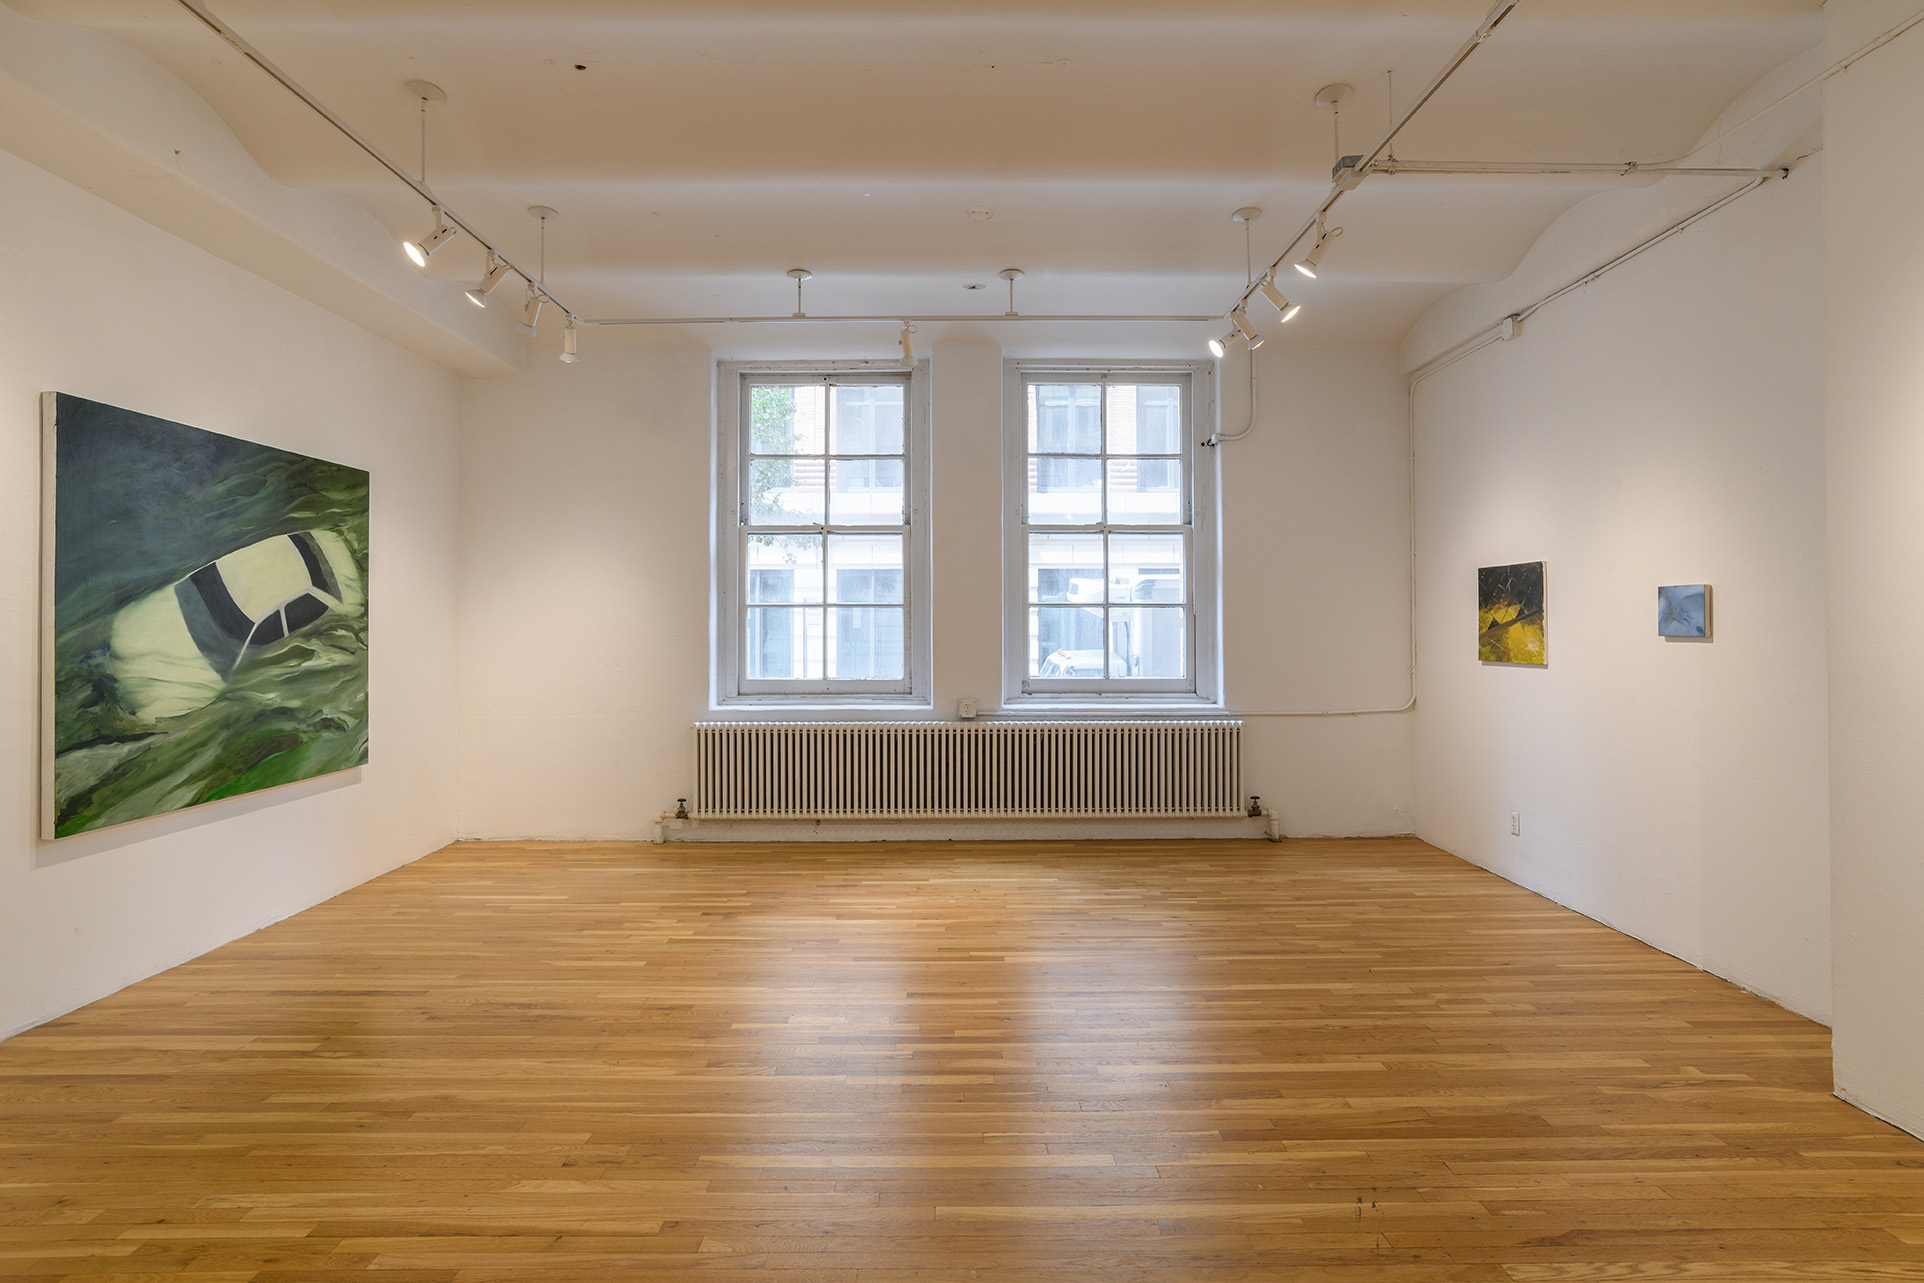 [Colorful paintings hung on opposite walls. Between them, two large windows. On the left is a large painting of a car, half-submerged in swampy turbulent water the color of seaweed, ivory and soot. On the right are two smaller paintings. One shows the corner of a dance floor bathed in yellow light and shadows, the other shows a cool moody bathroom sink with a hand submerged in its still, quiet water.]